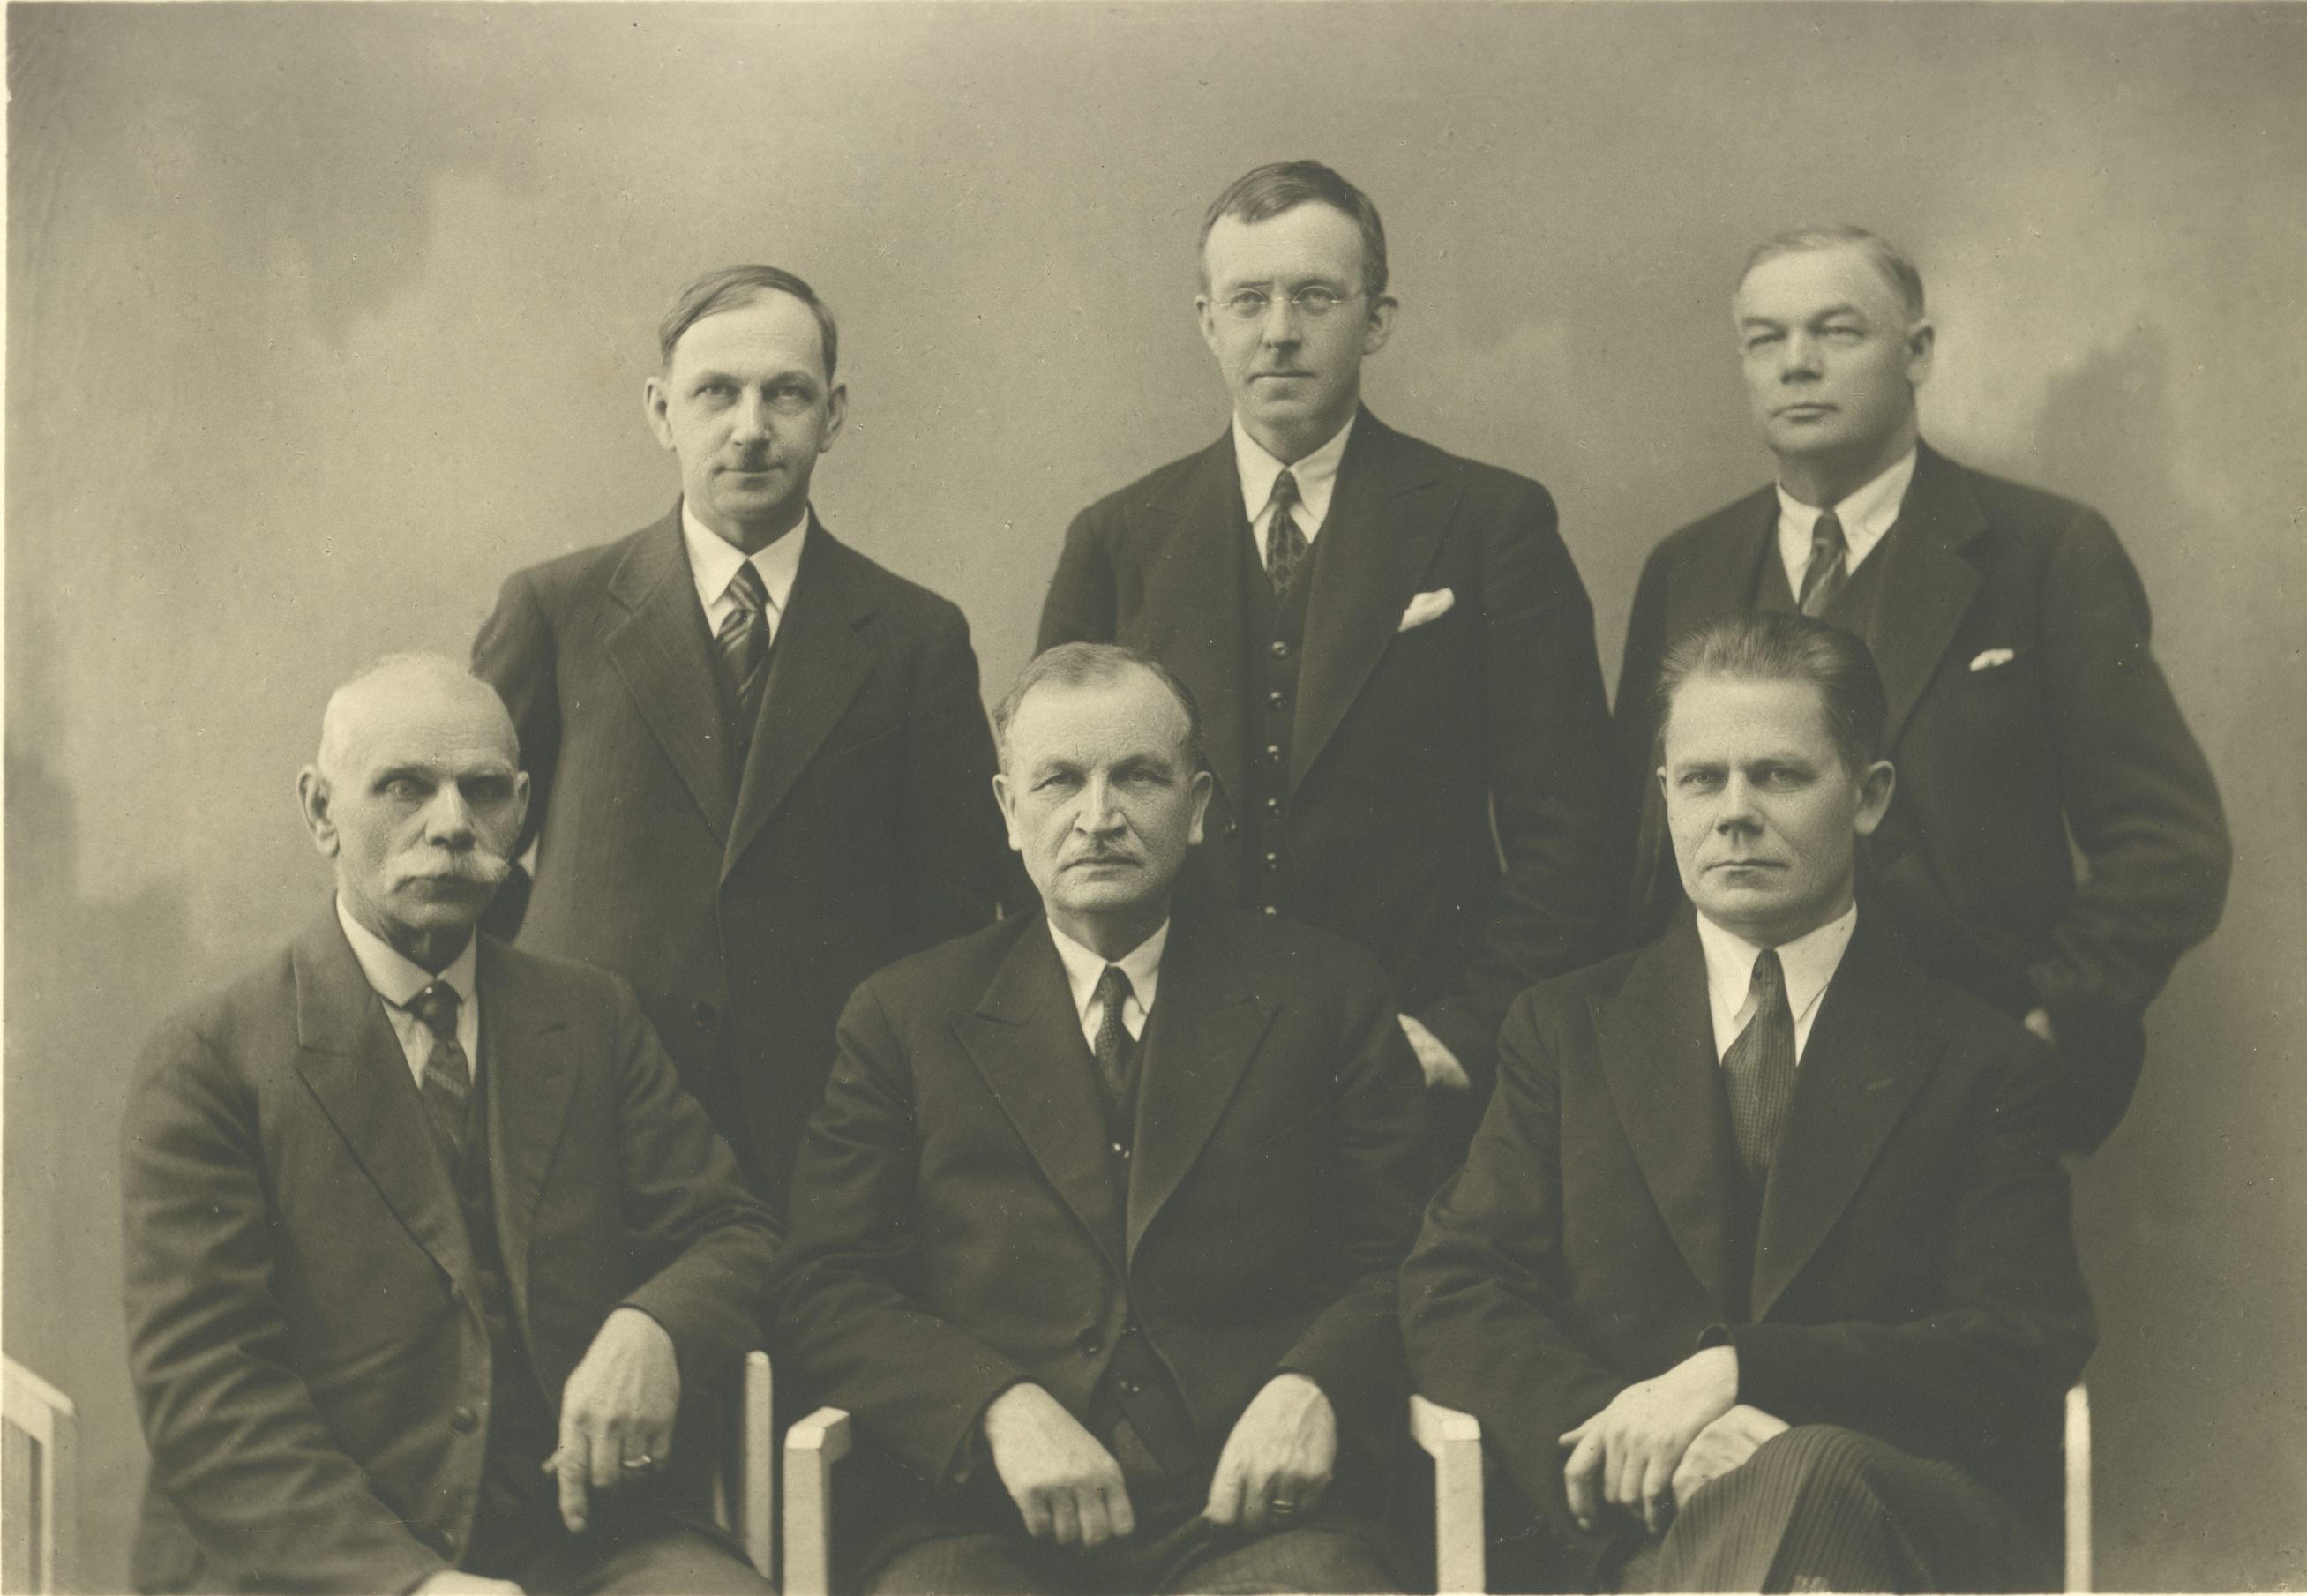 Kõpp, Juhan - in the middle of the front row, as a member of the board of the Estonian University Students' Association.